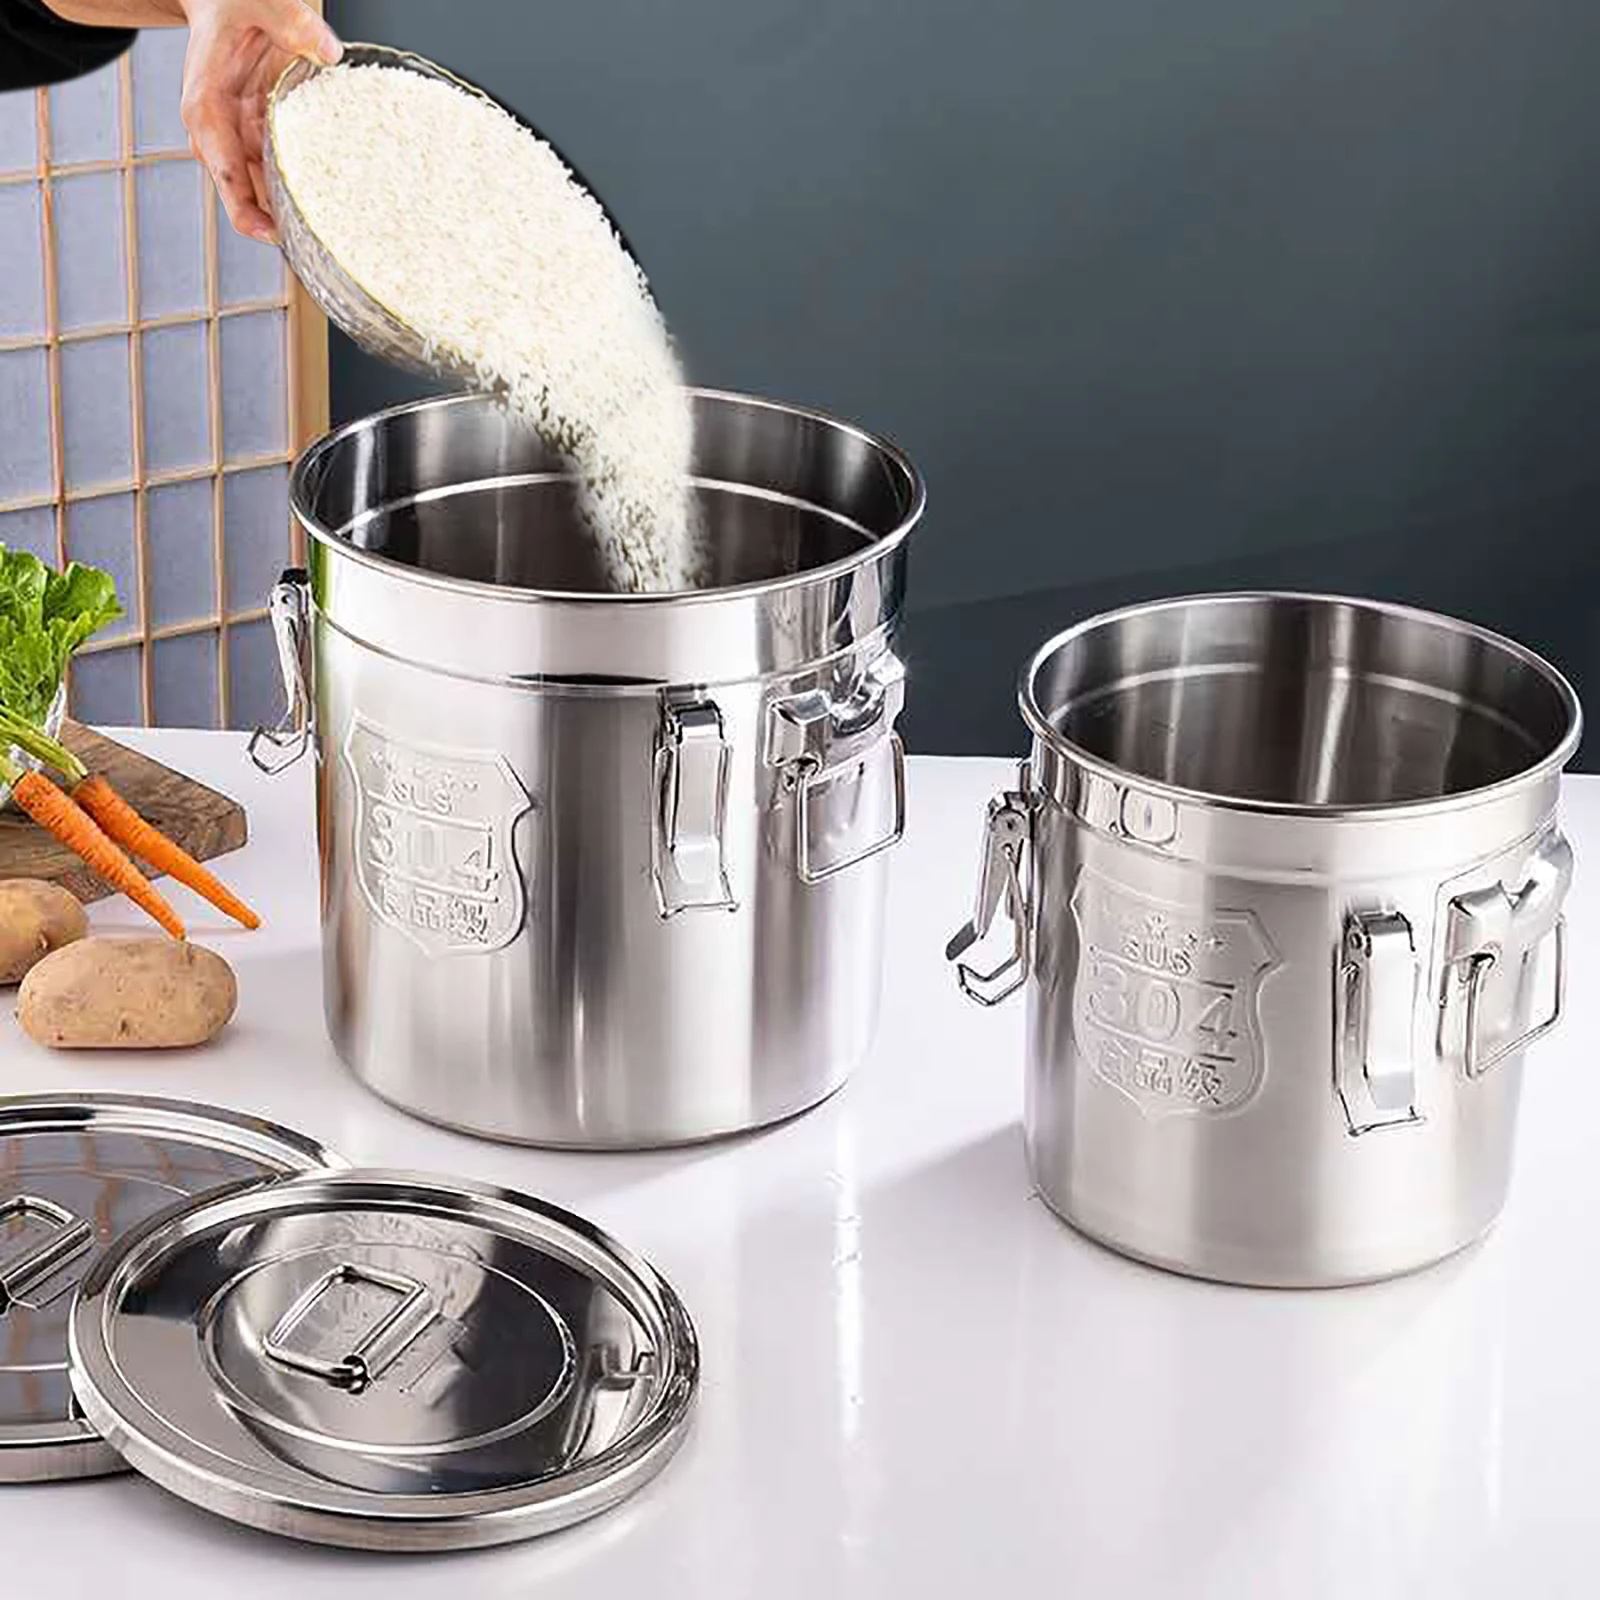 

Stainless Steel Airtight Canister for Kitchen, Dry/Wet Food Rice Cereal Grain Canisters Container Fresh Storage Bucket w/Handles